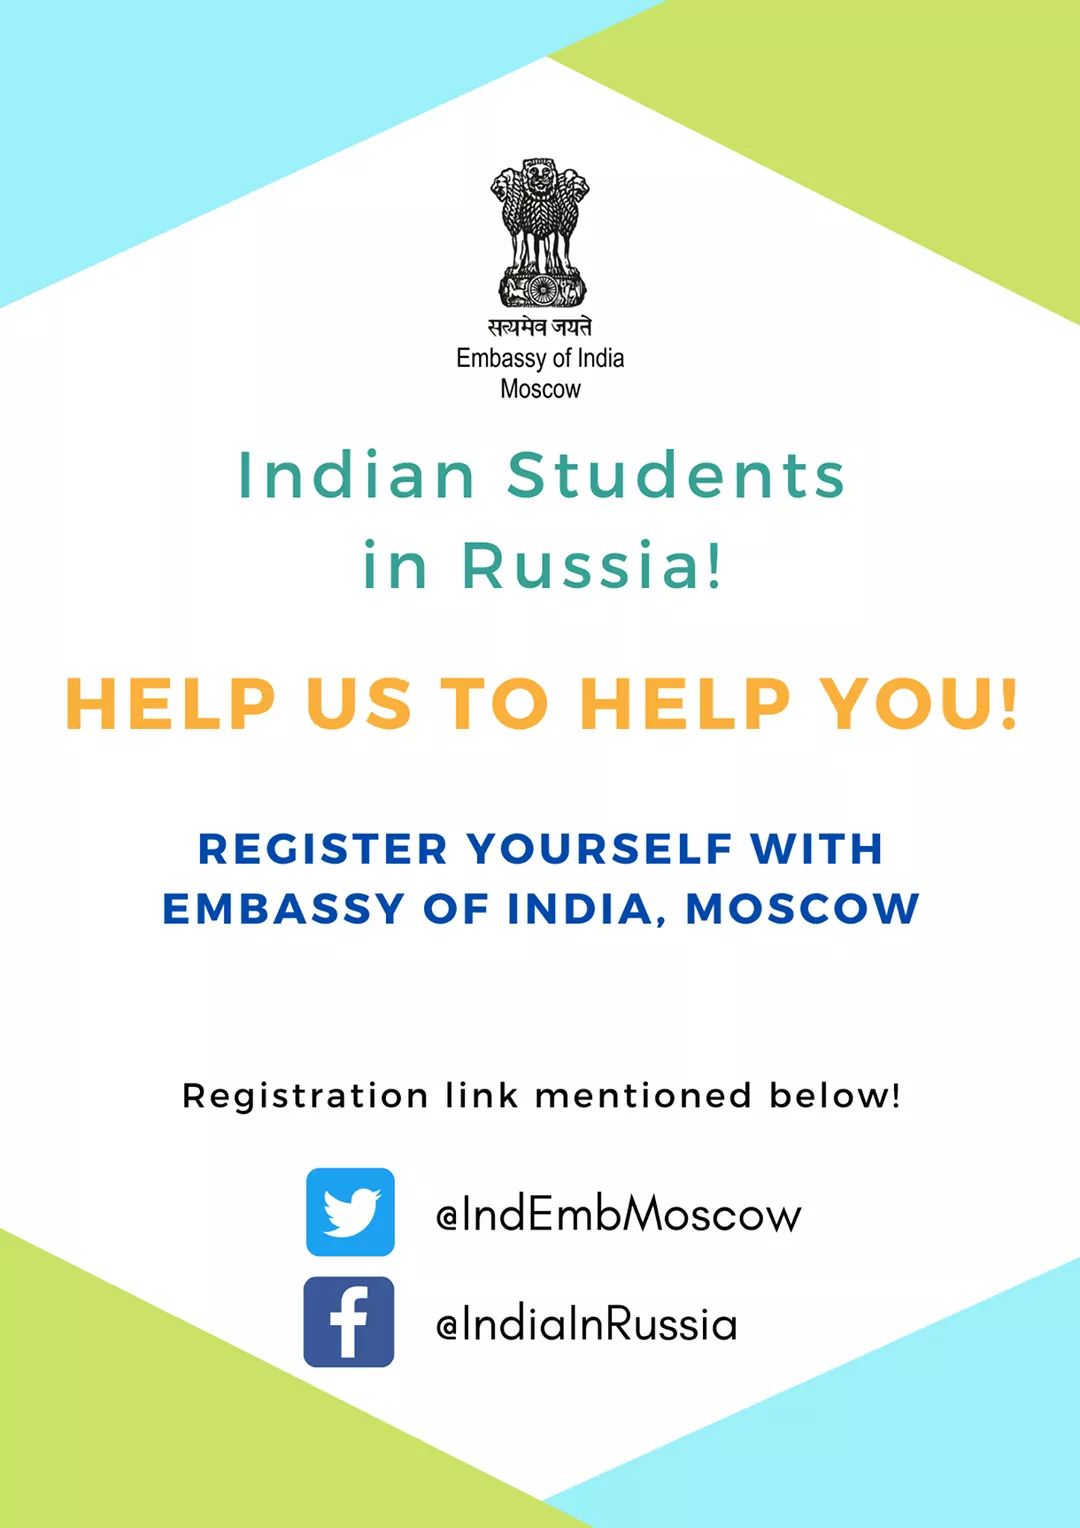 Indian Students in Russia - COVID-19 Initiative by Embassy of India